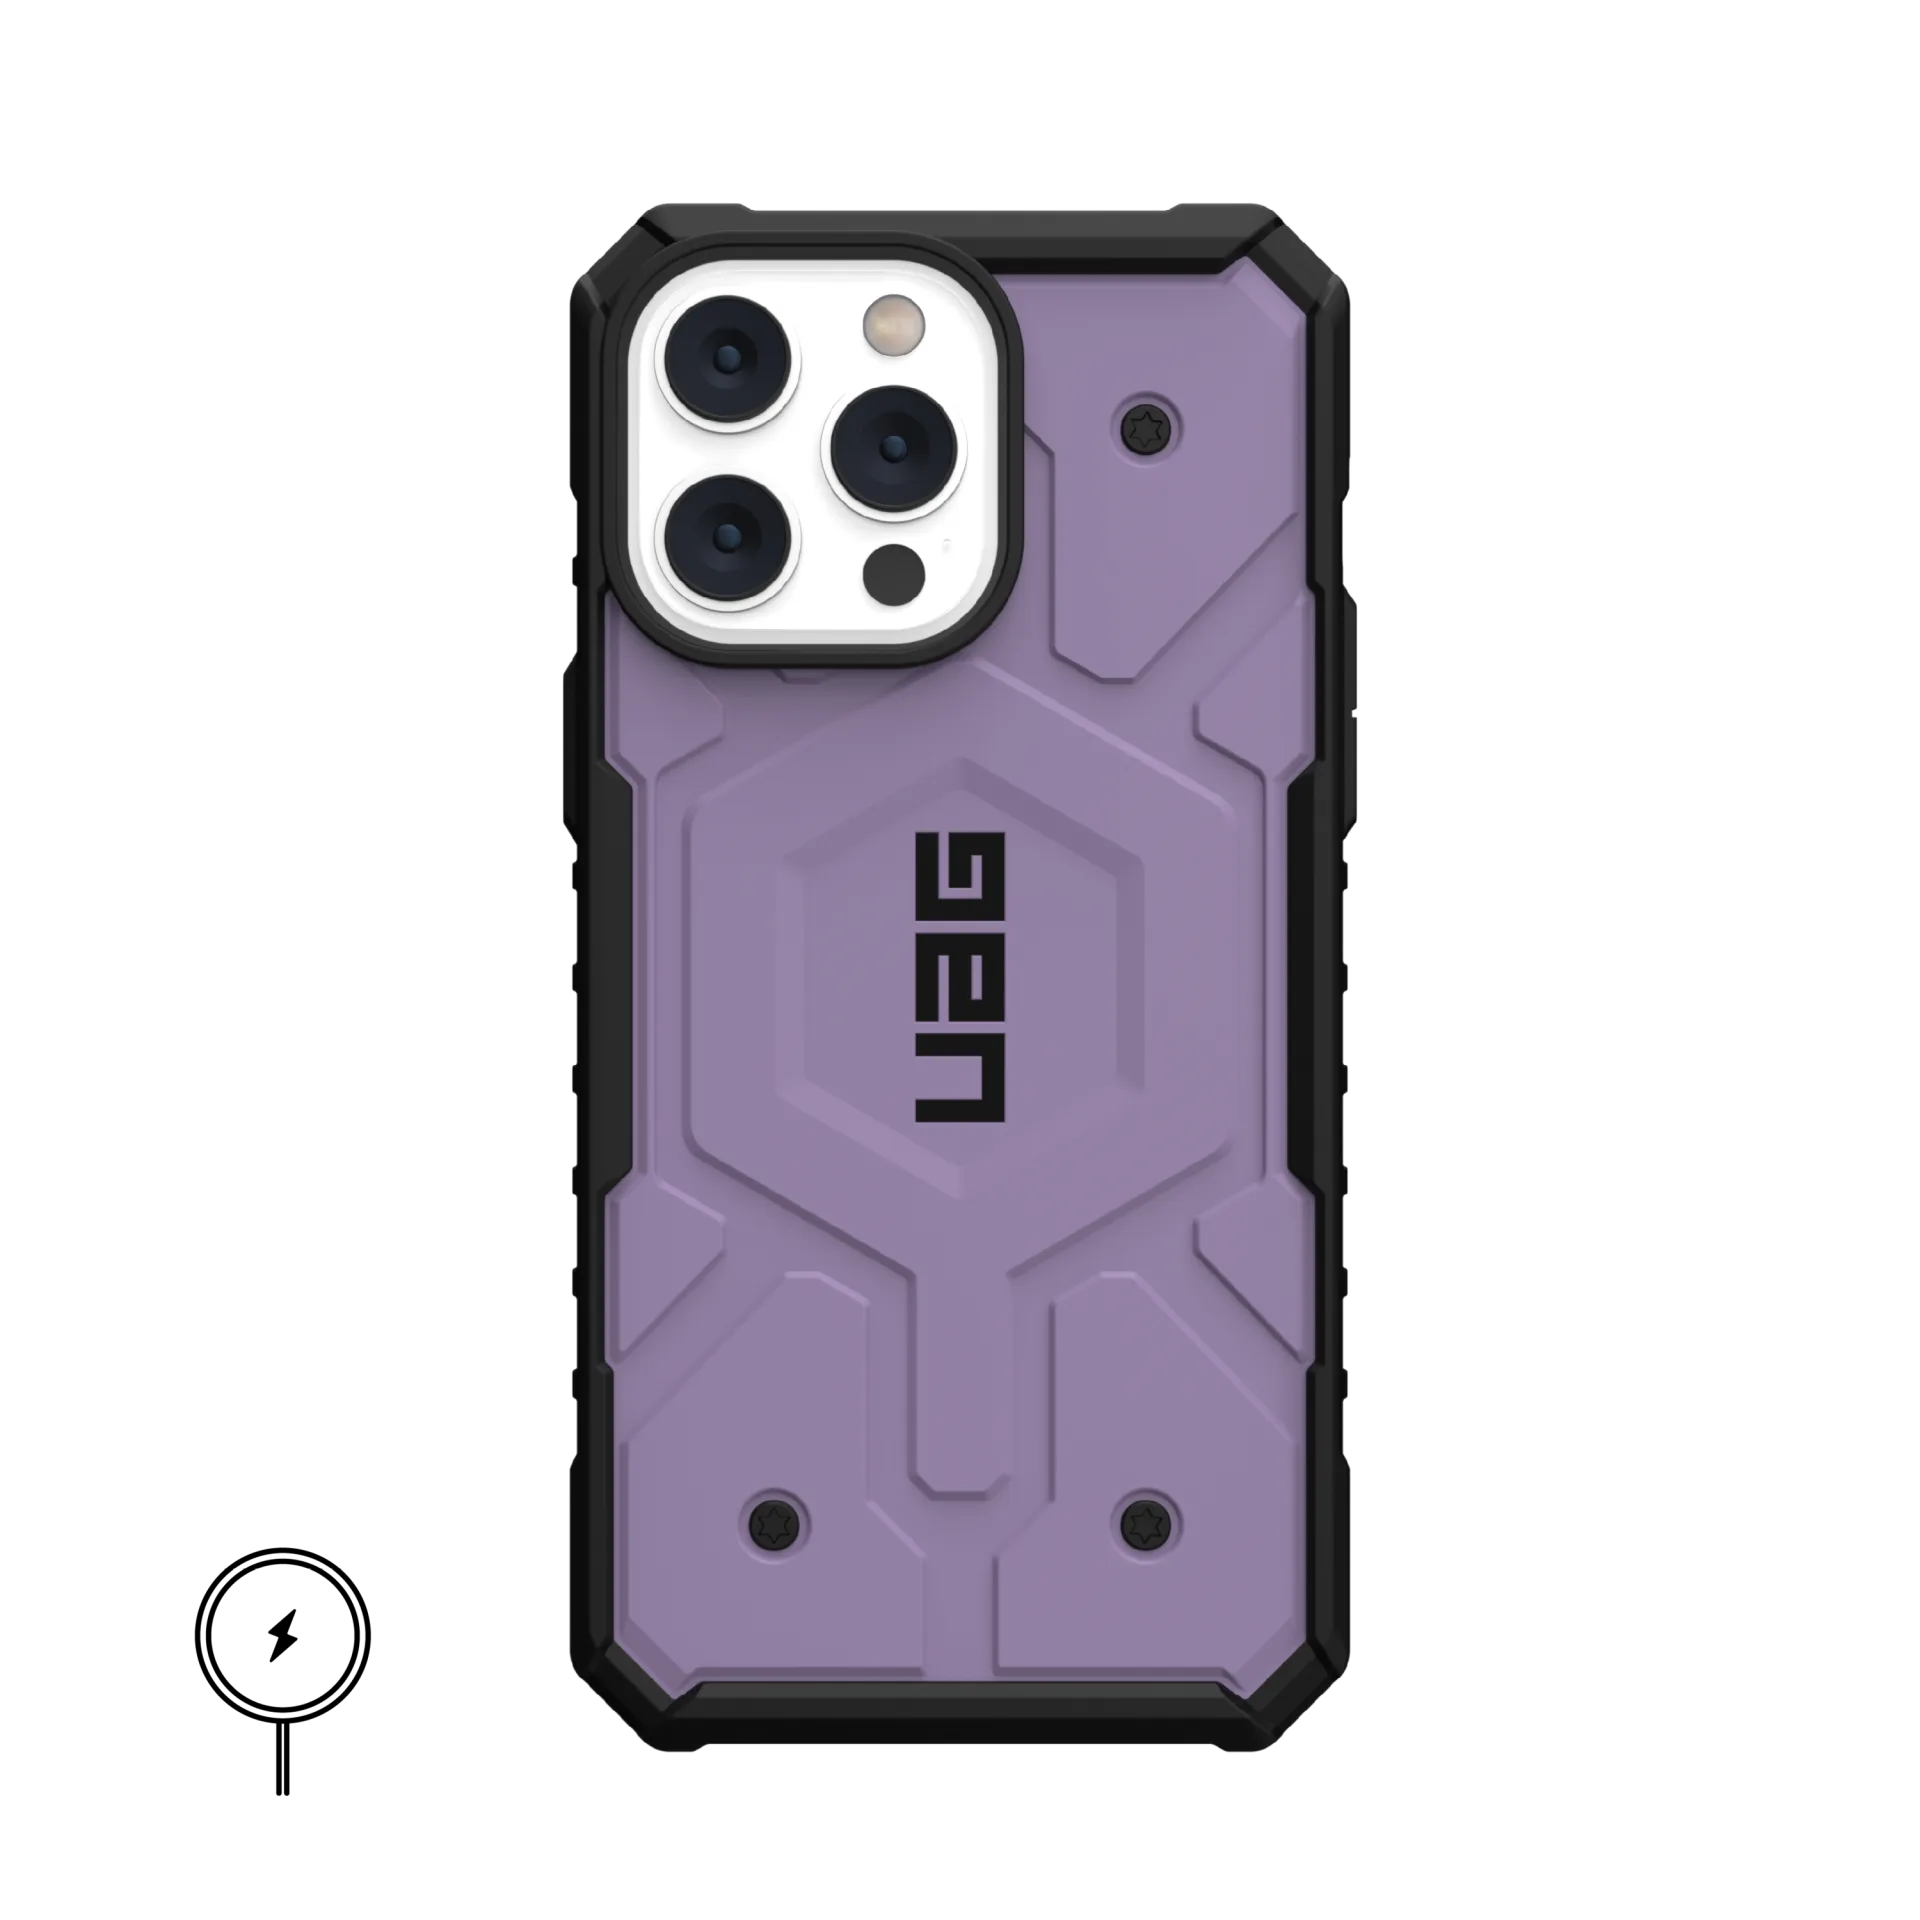 iPhone 14 Pro Armor Cover | Urban Armor iPhone 14 Pro Case, UAG Pathfinder Mag-Safe Compatible, Slim Fit Rugged Protective Case/Cover Designed for iPhone 14 Pro (2022) (Military Drop Tested) - Purple